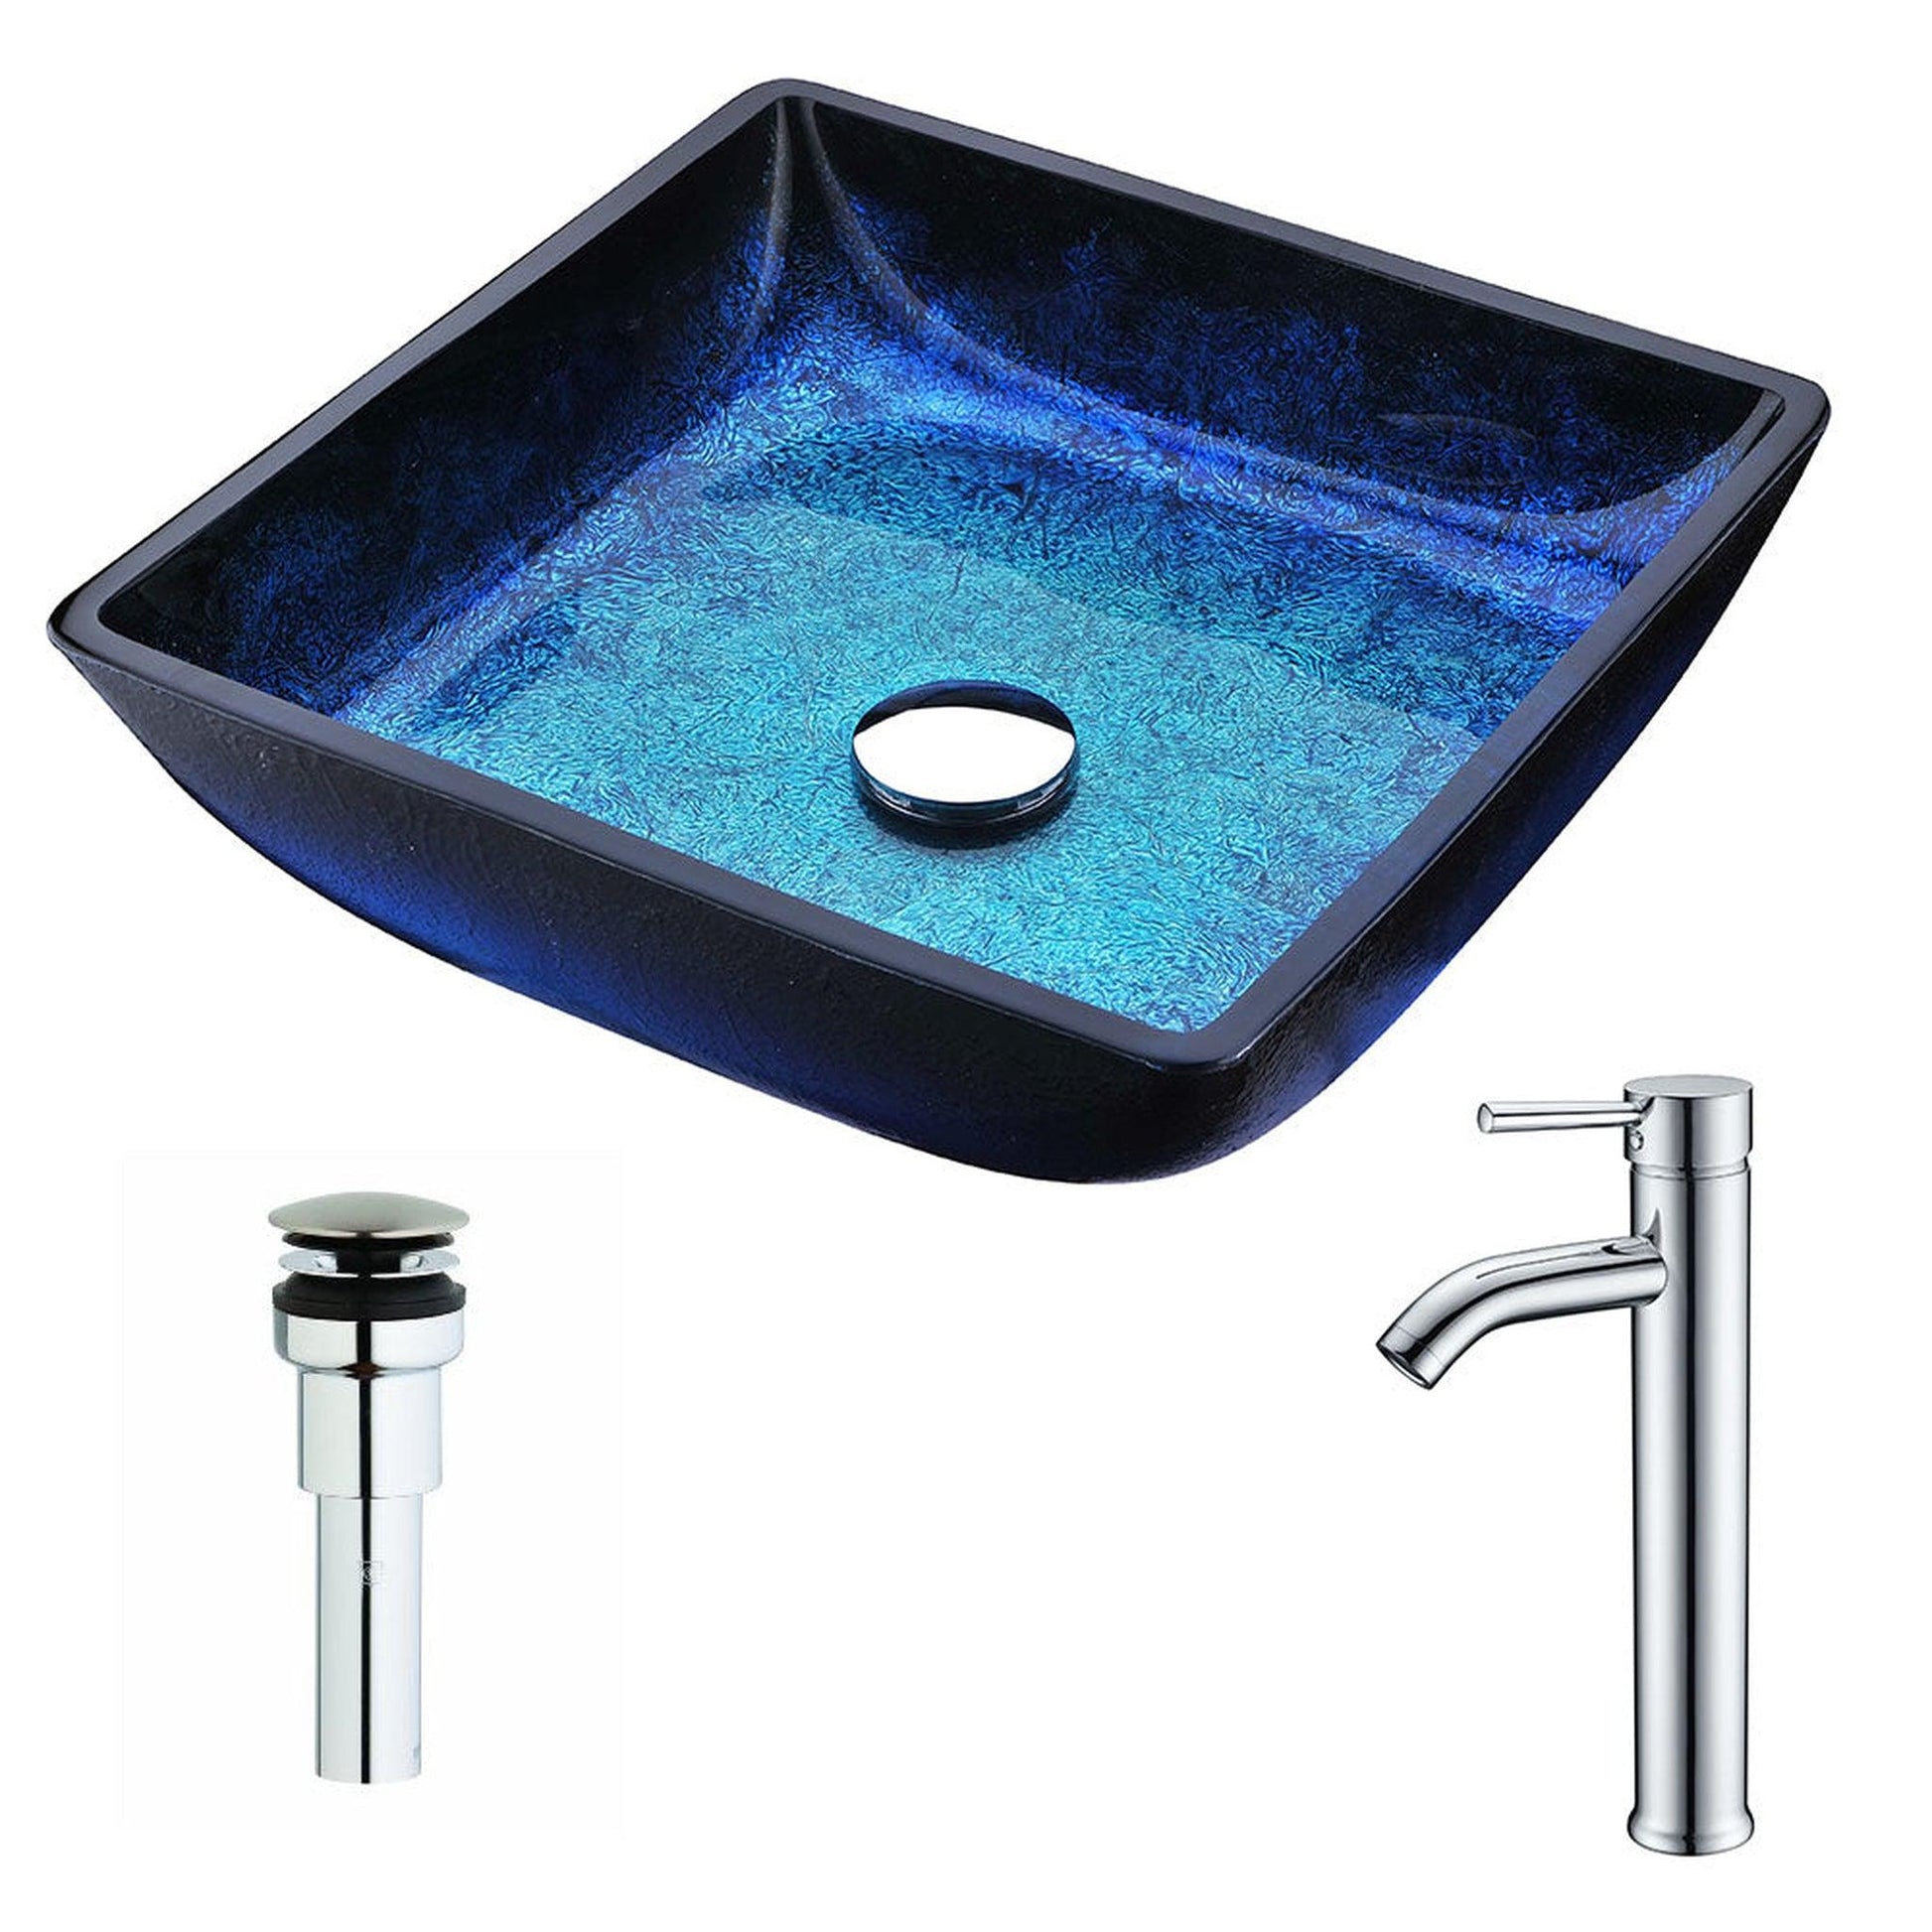 ANZZI Viace Series 15" x 15" Square Shaped Blazing Blue Deco-Glass Vessel Sink With Chrome Pop-Up Drain and Fann Faucet